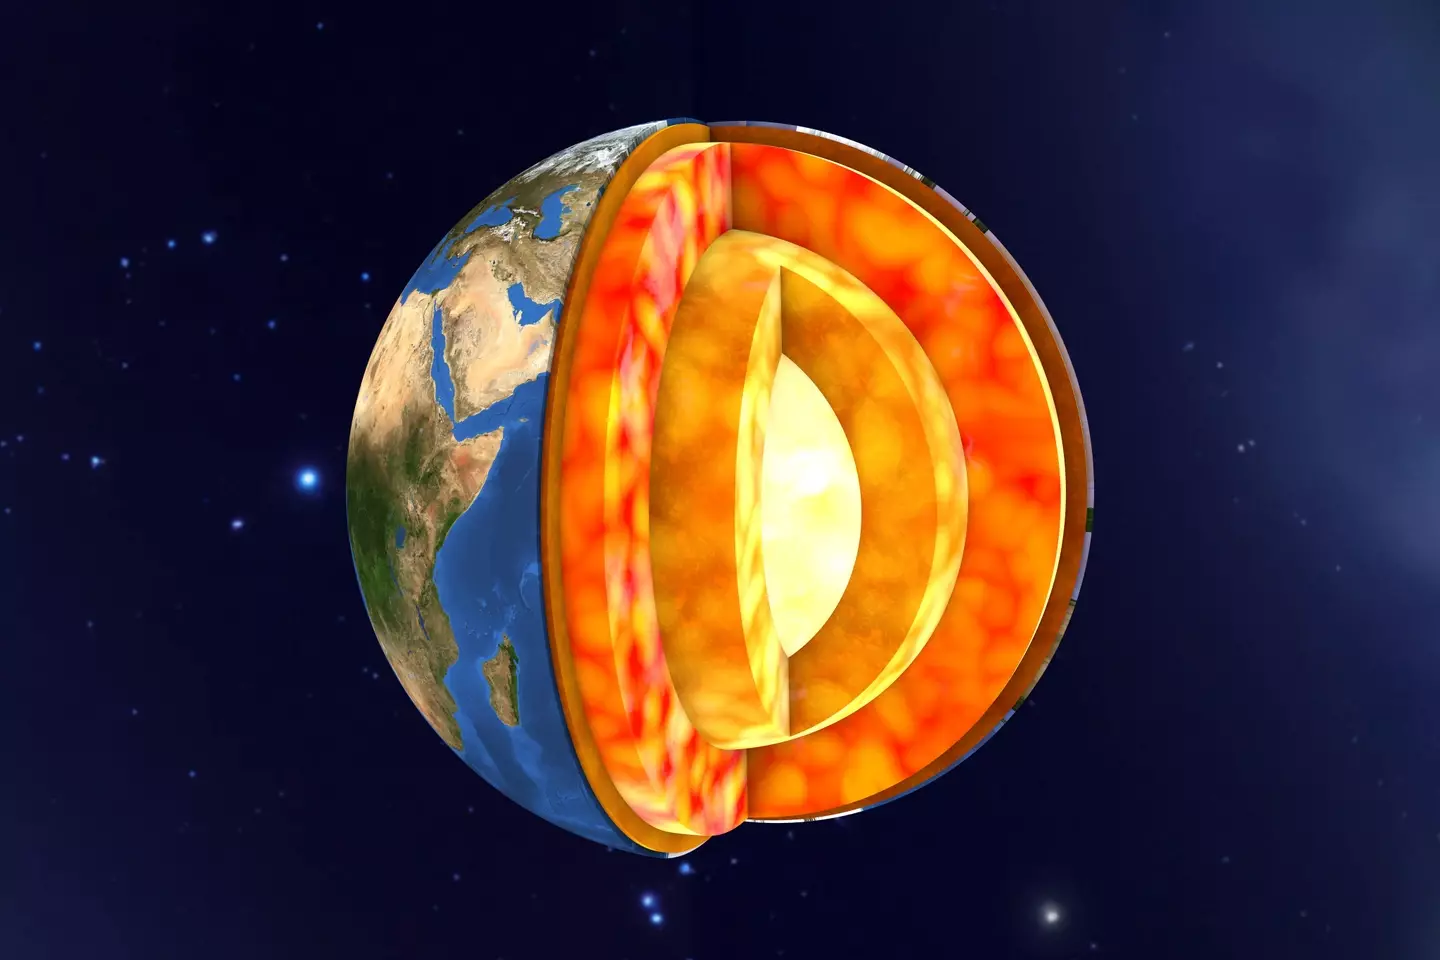 Earth’s mantle lies between the core and the crust.